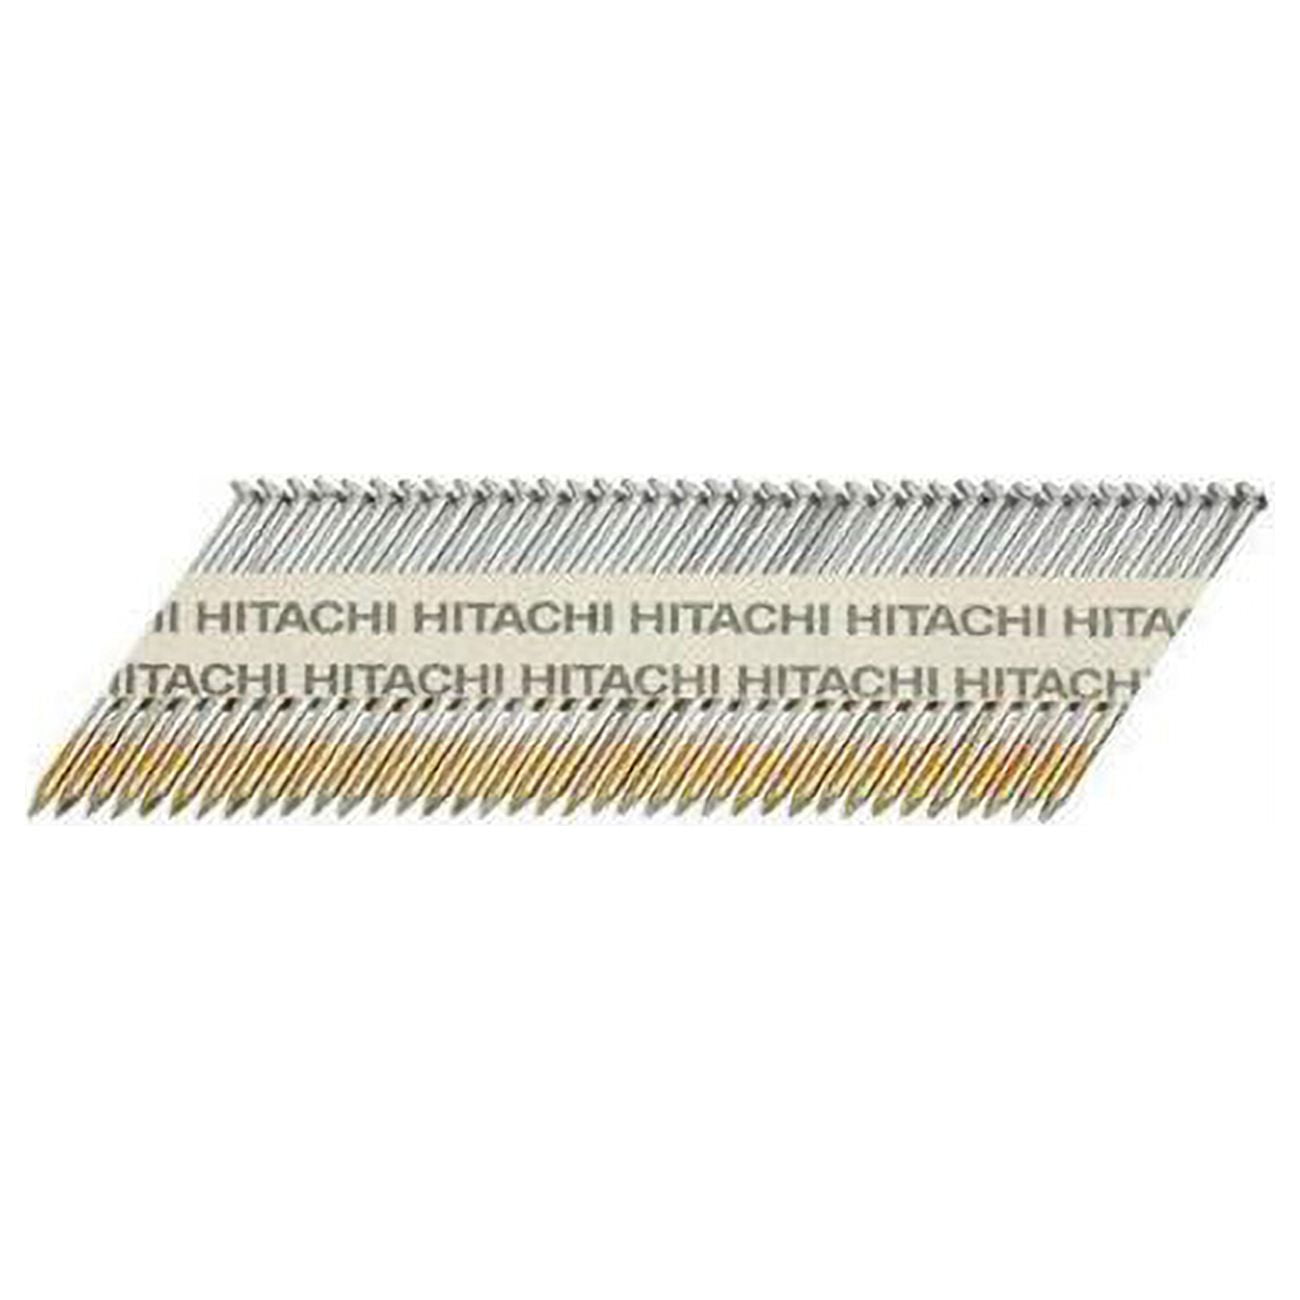 Picture of Metabo power tools 2596765 30 deg 10 Gauge Smooth Shank Angled Strip Framing Nails  3 x 0.131 in. Dia. - Pack of 2500